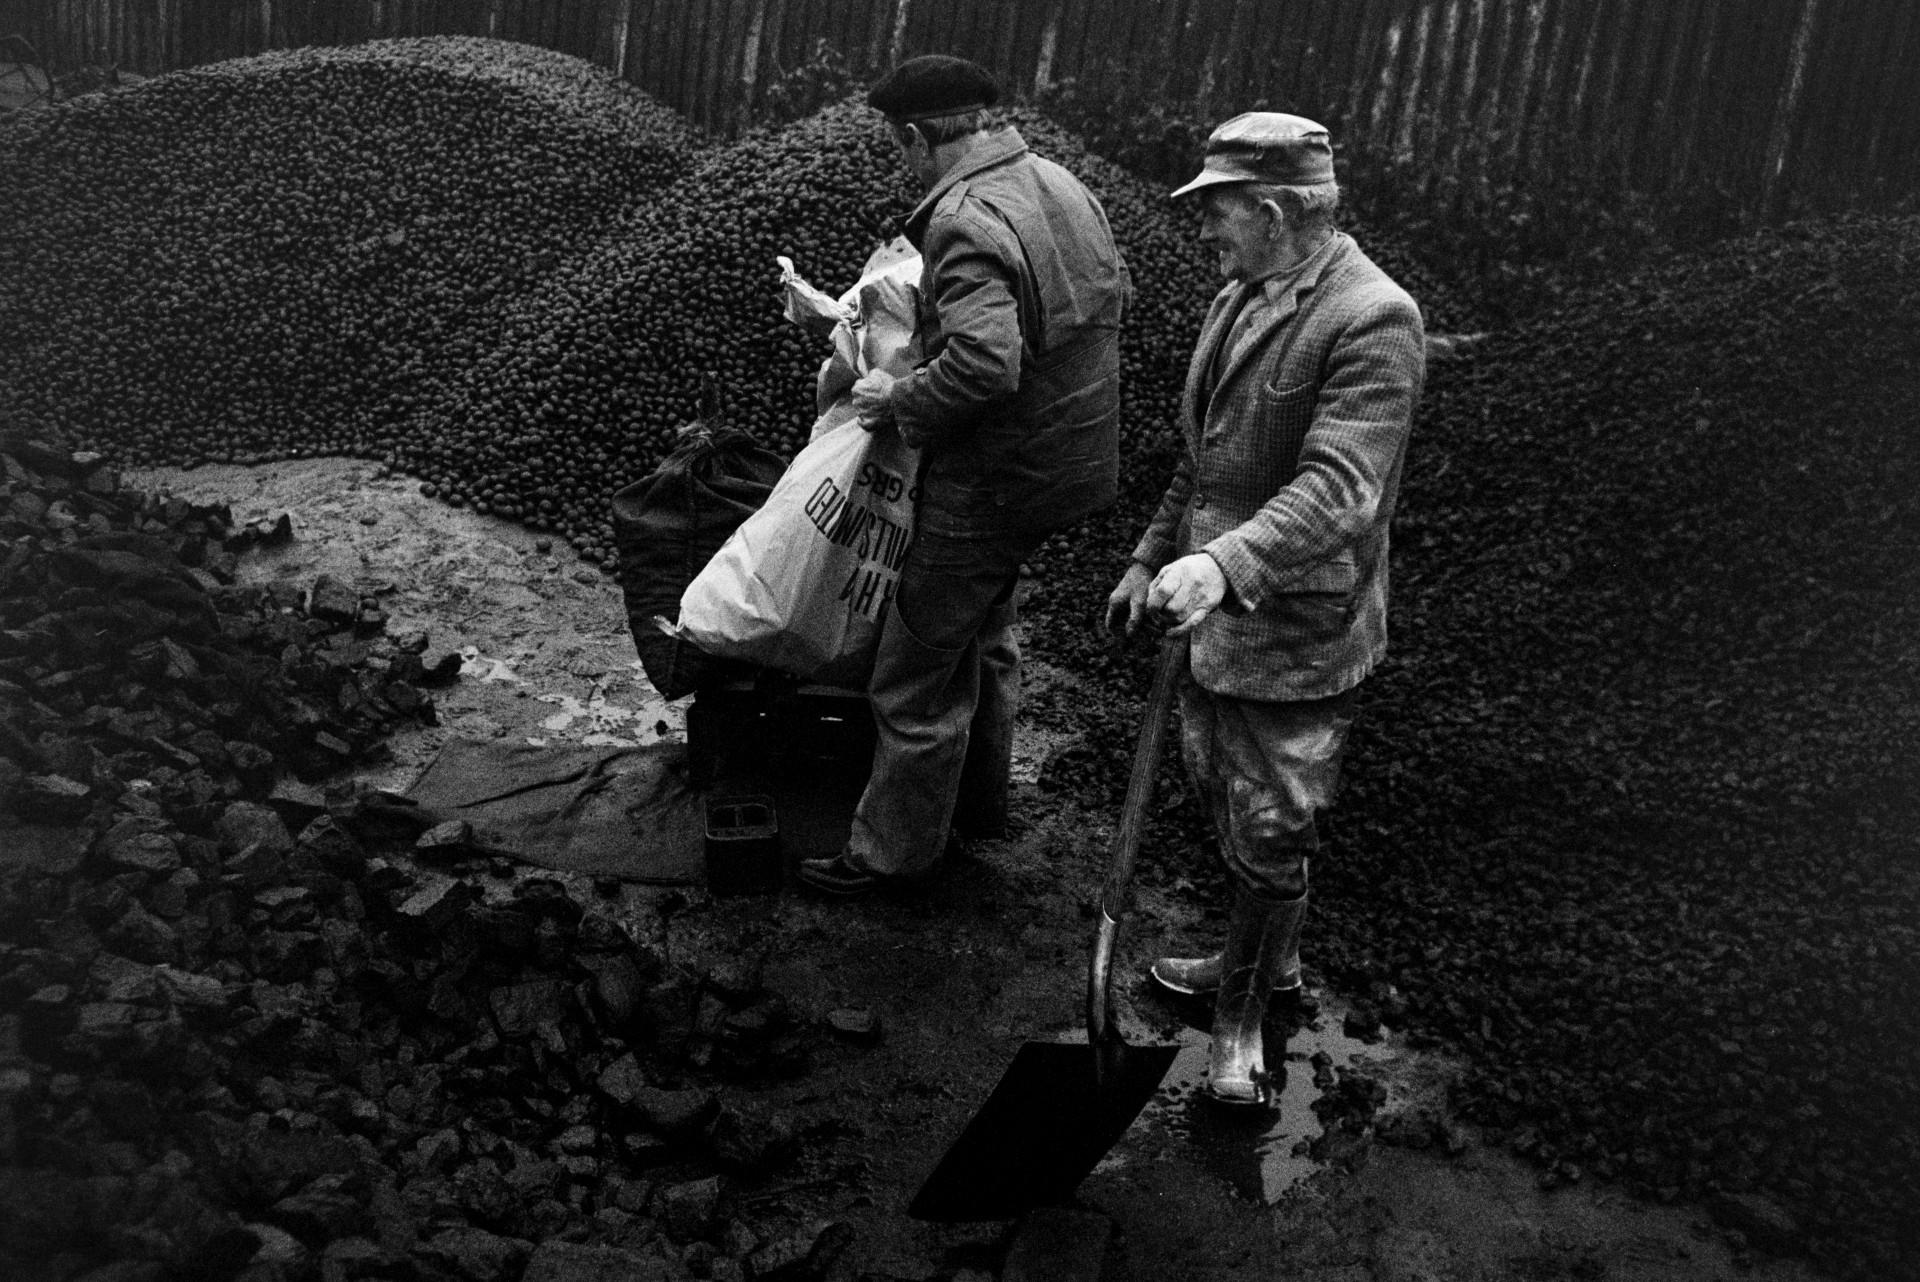 Ivor Bourne collecting coal from a coal merchant near Dolton Beacon. He is lifting a sack of coal. Another man is stood holding a shovel. Mounds of coal can be seen in the background.